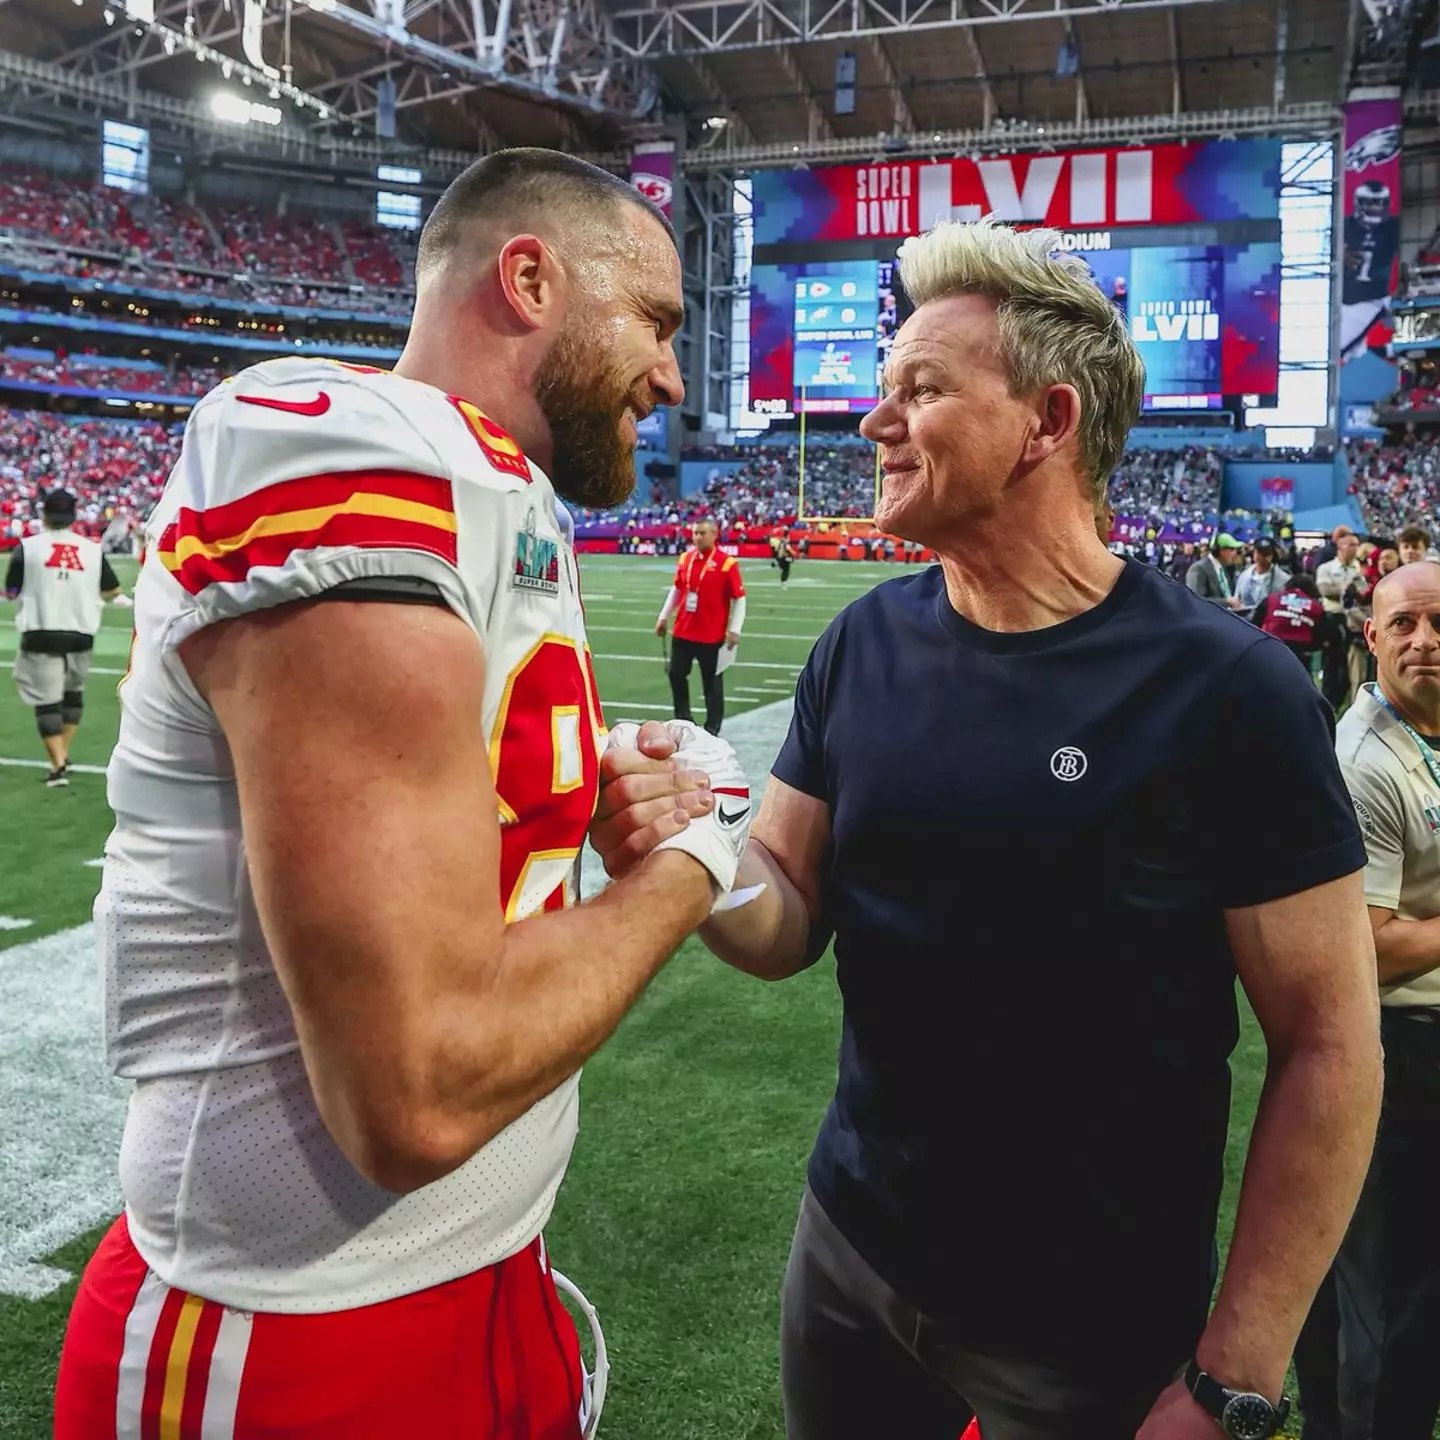 Travis Kelce and Gordon Ramsay embraced in a handshake.